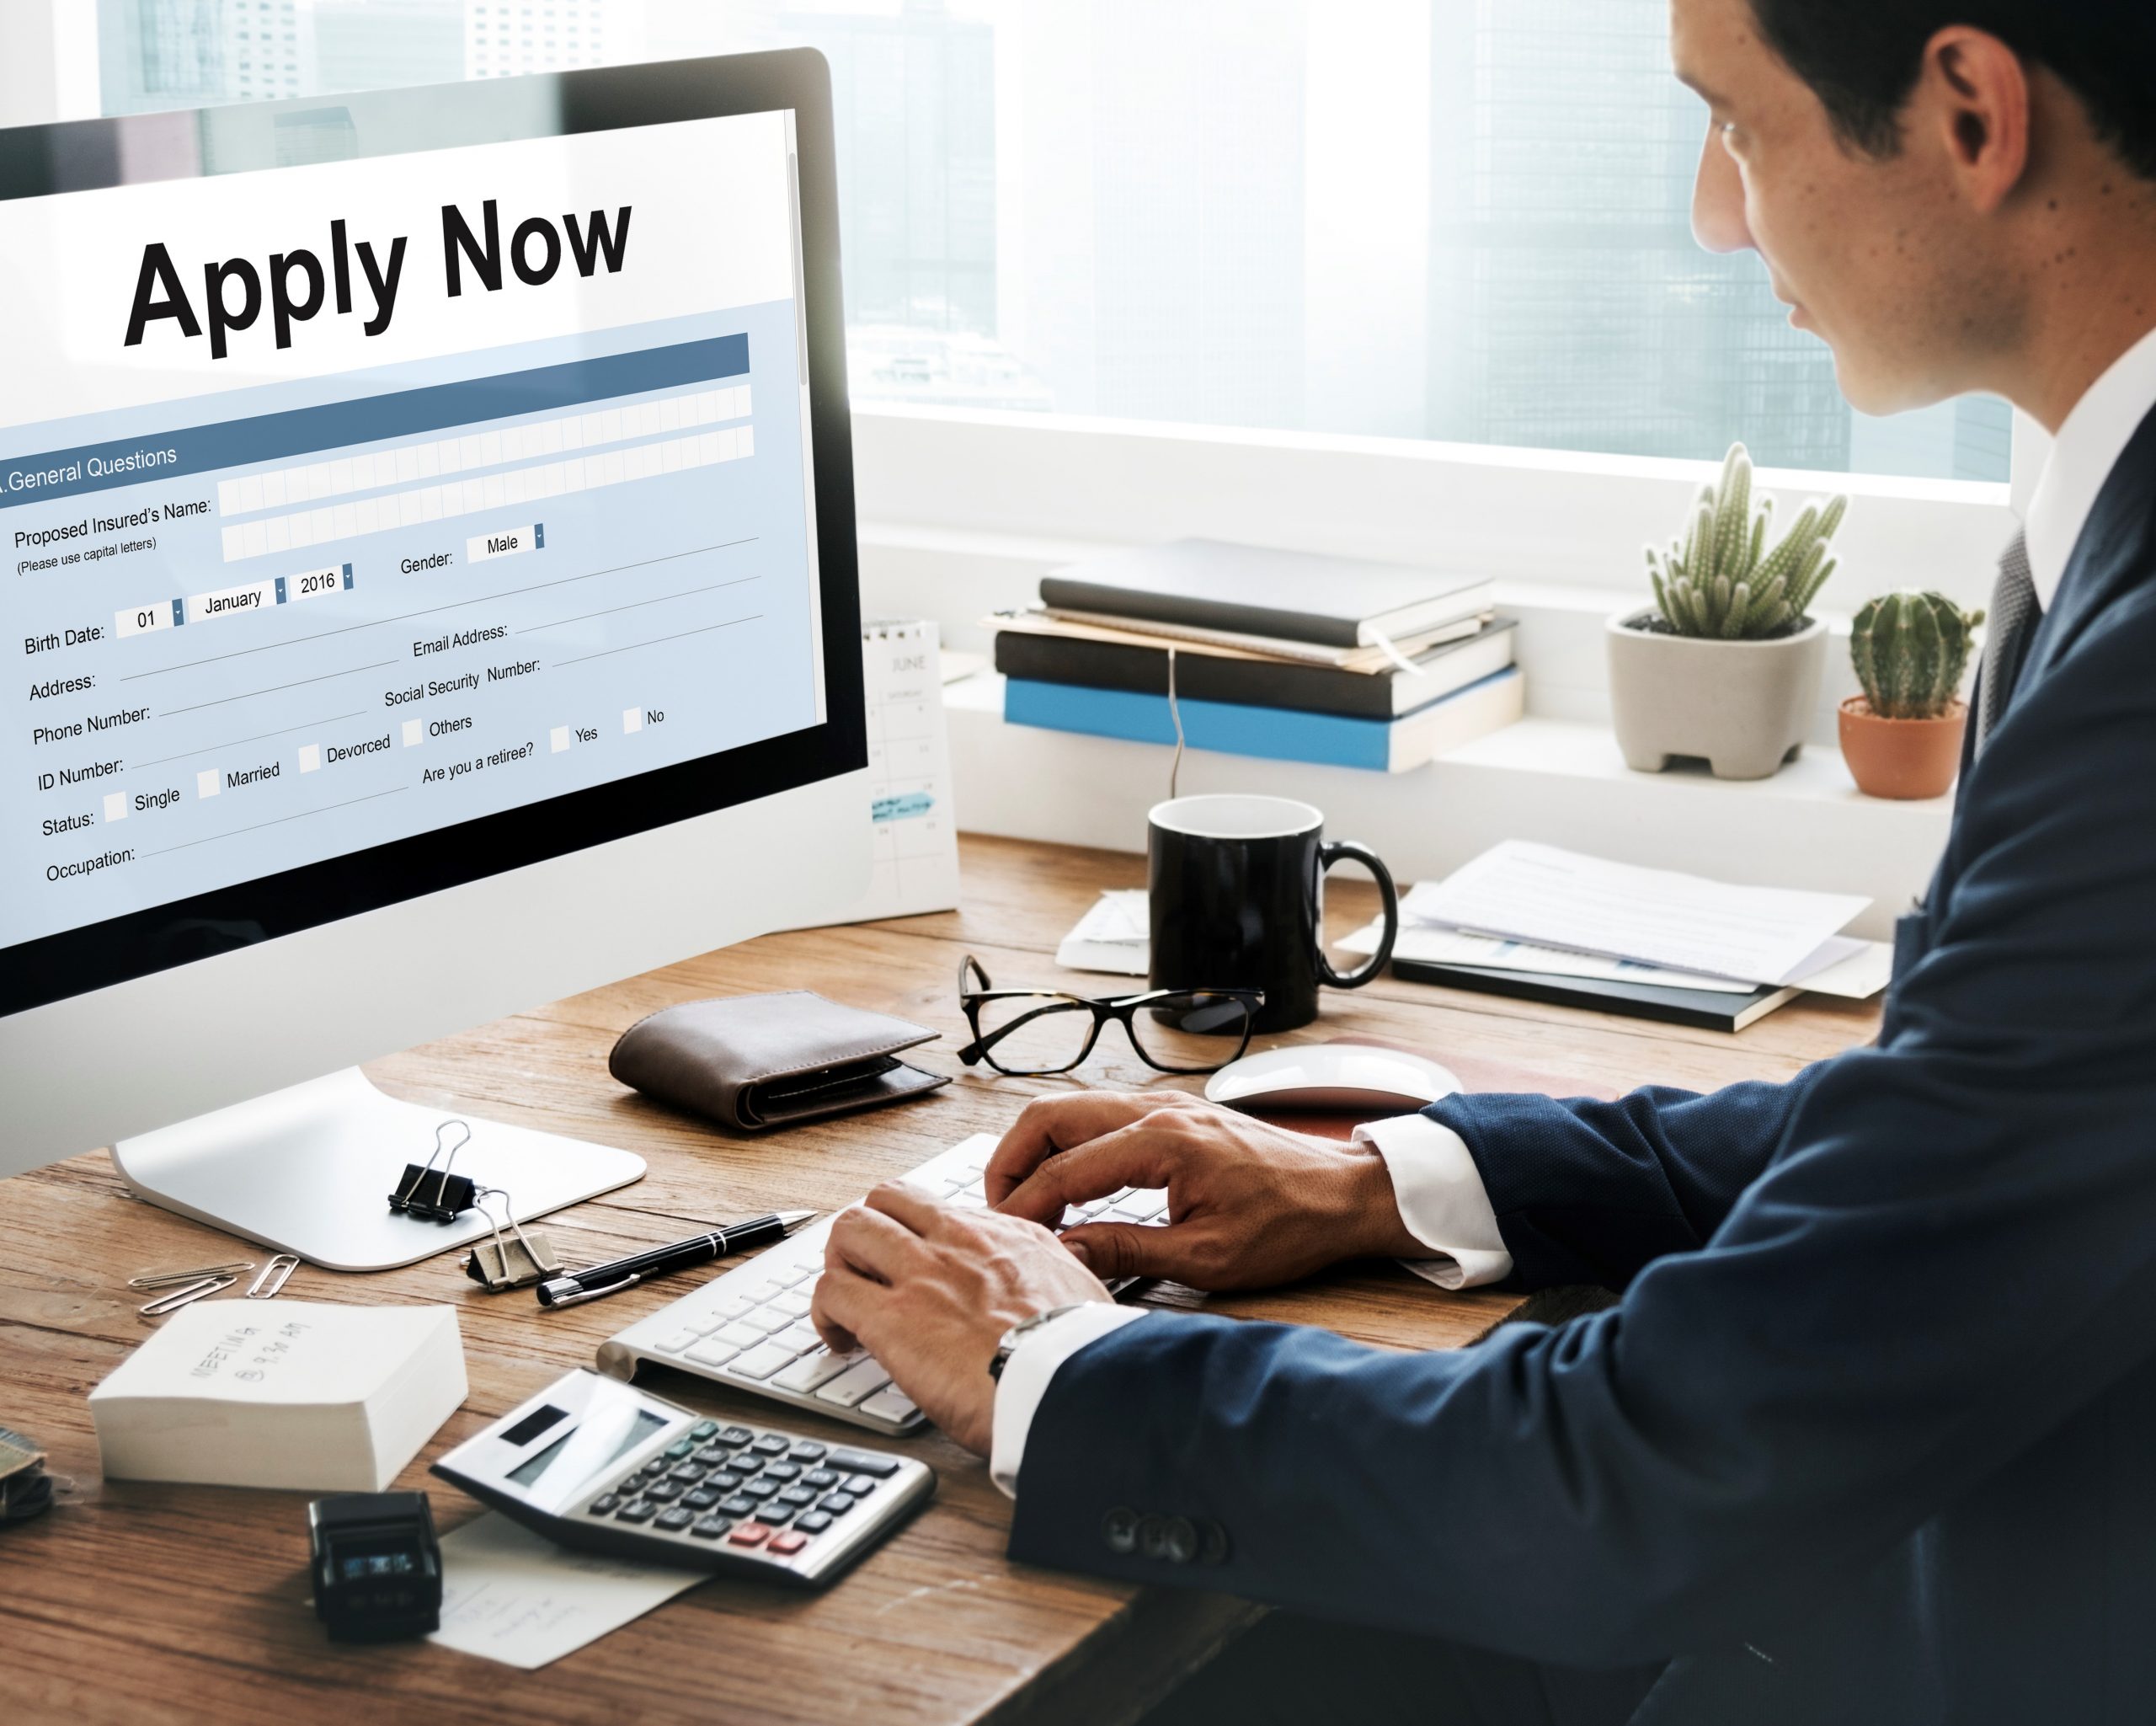 apply online application form recruitment concept 900 scaled